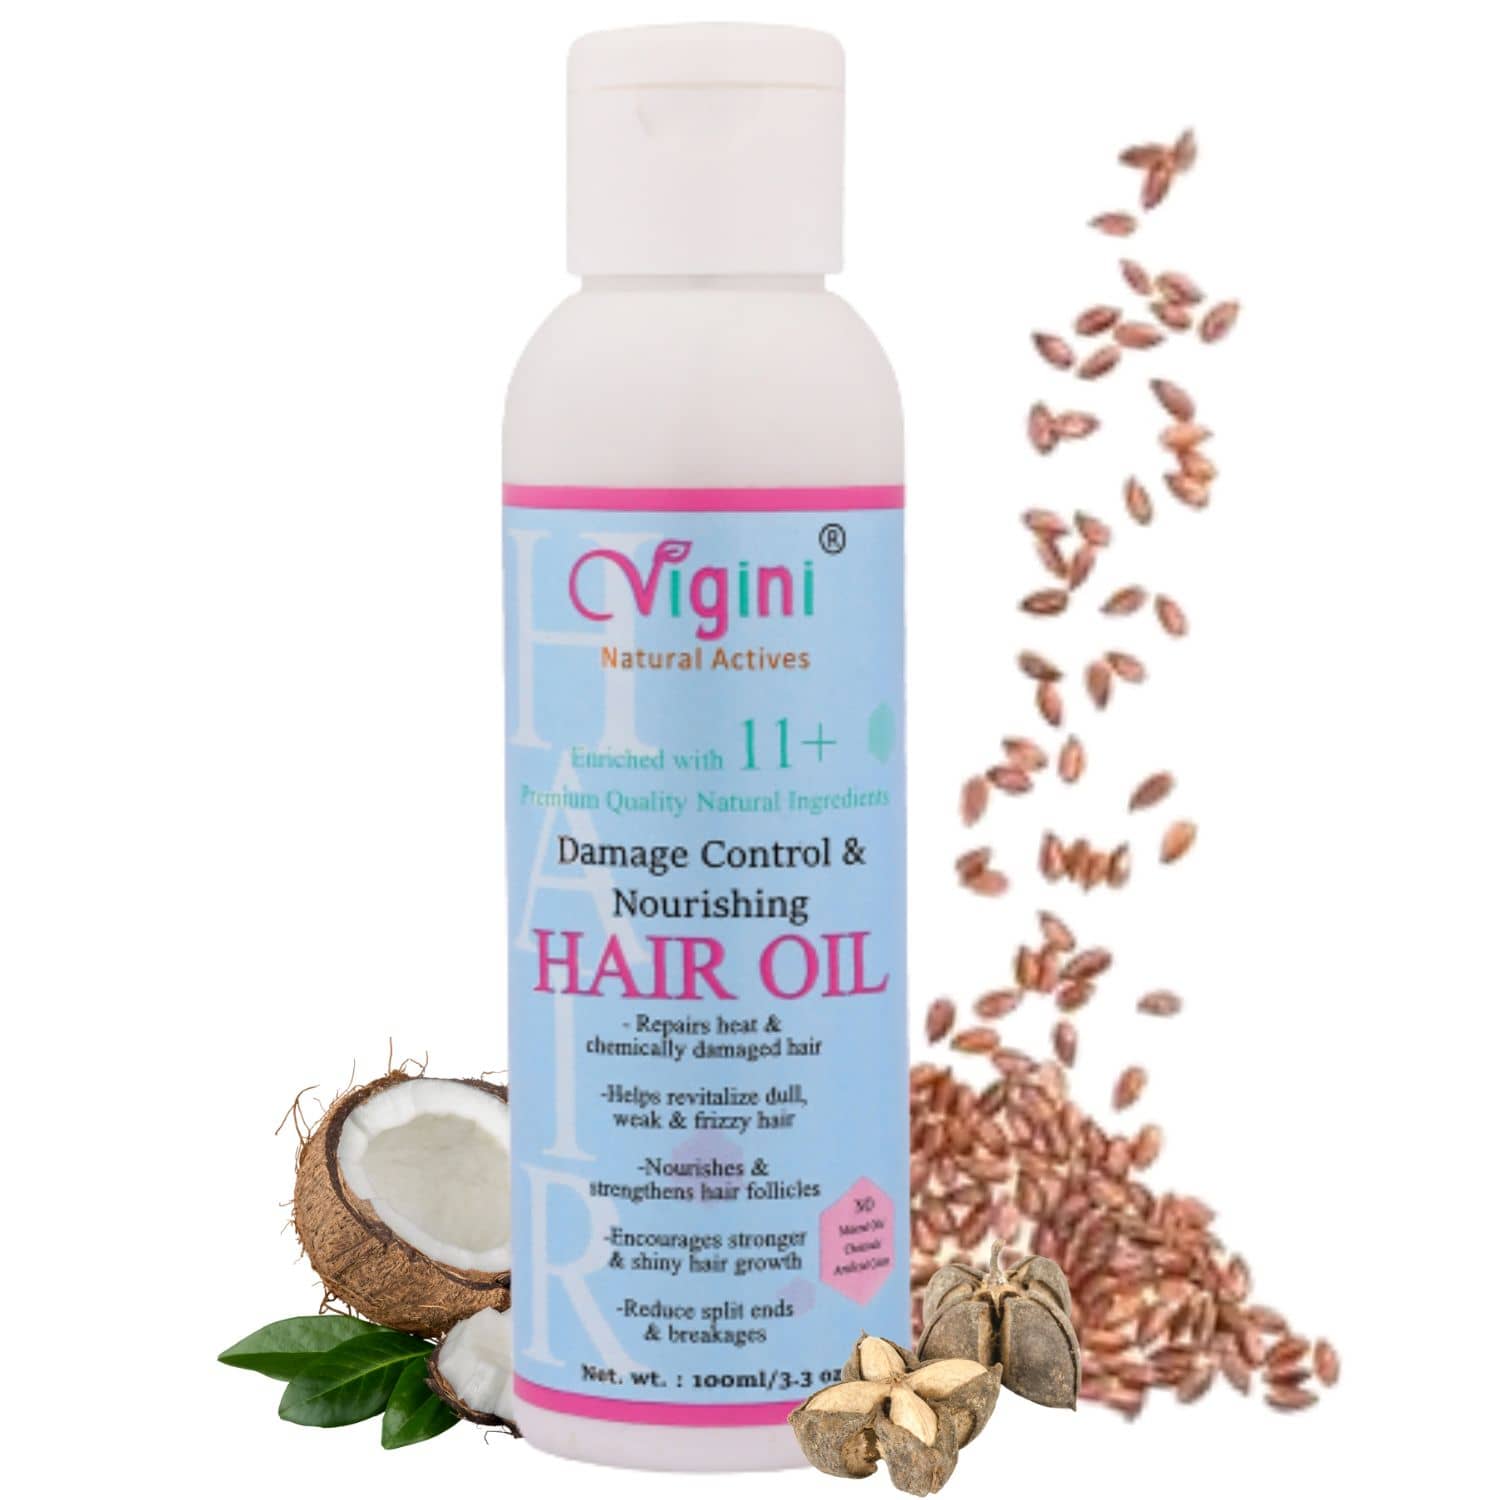 Damage Control and Nourishing Hair Oil